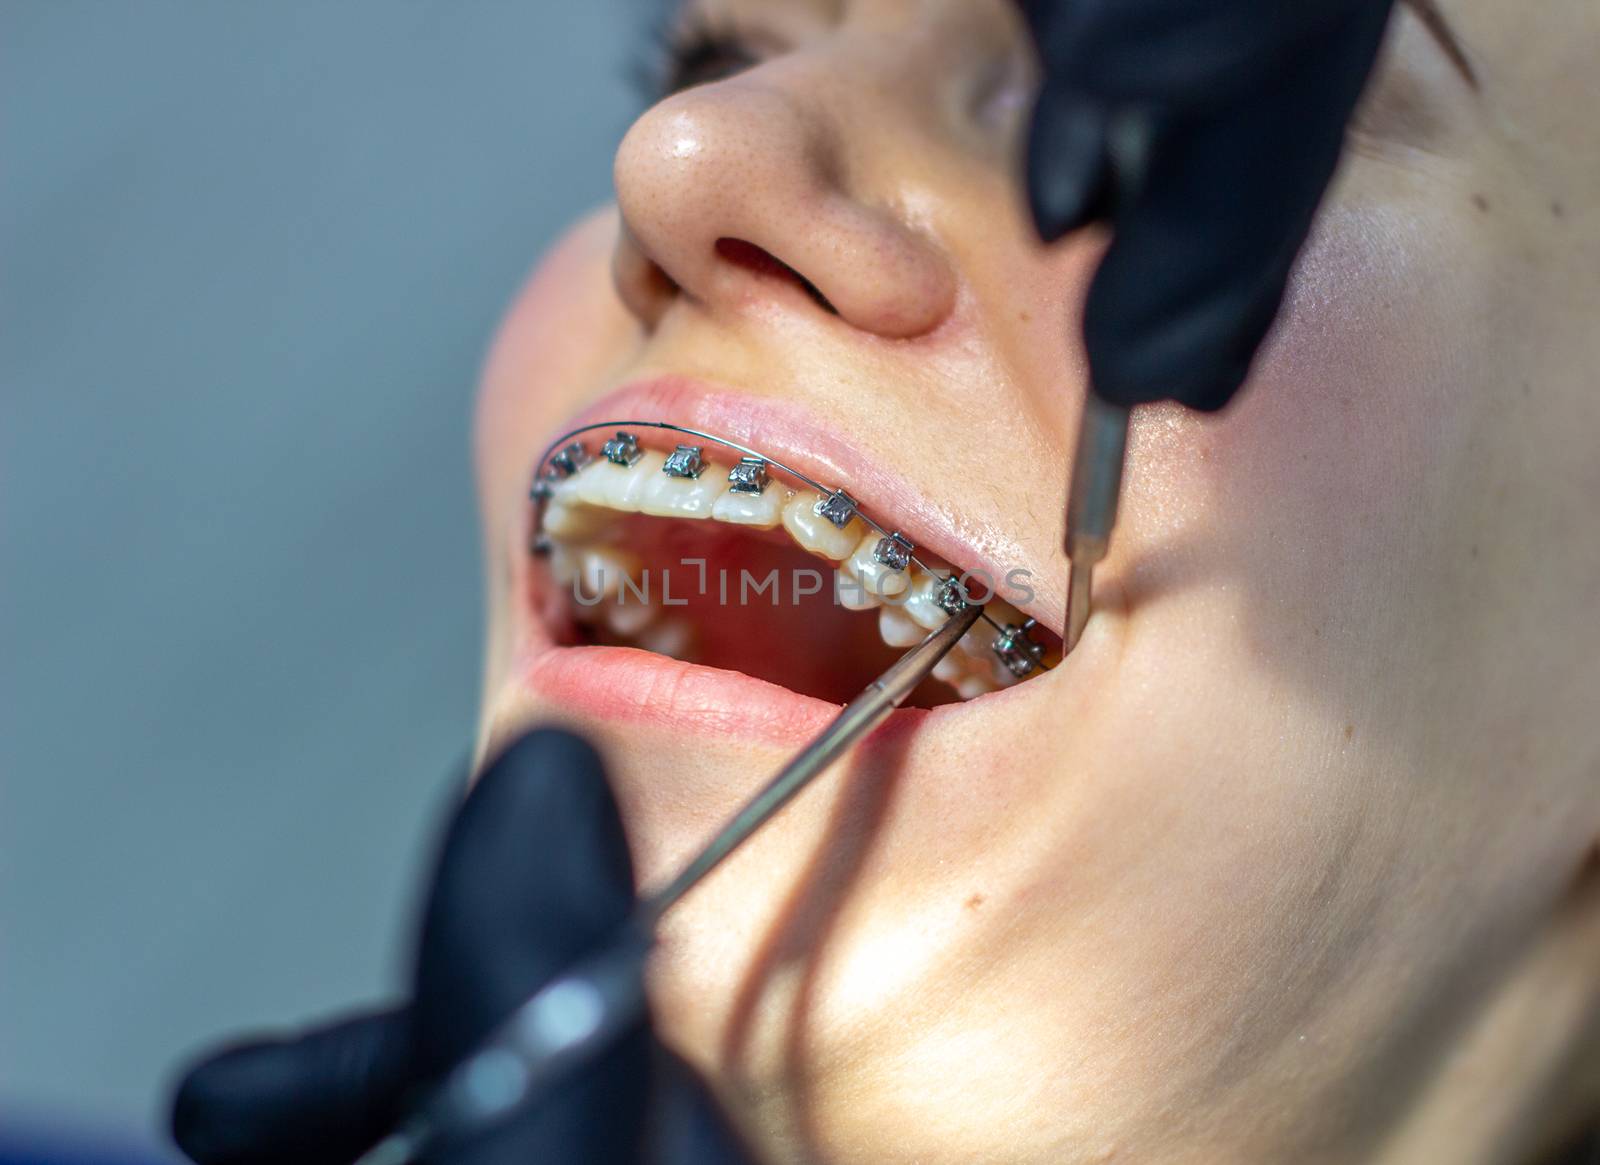 A woman with dental braces visits an orthodontist in the clinic, in a dental chair. during the procedure of installing the arch of braces on the upper and lower teeth. The dentist is wearing gloves and has dental instruments in his hands. The concept of dentistry